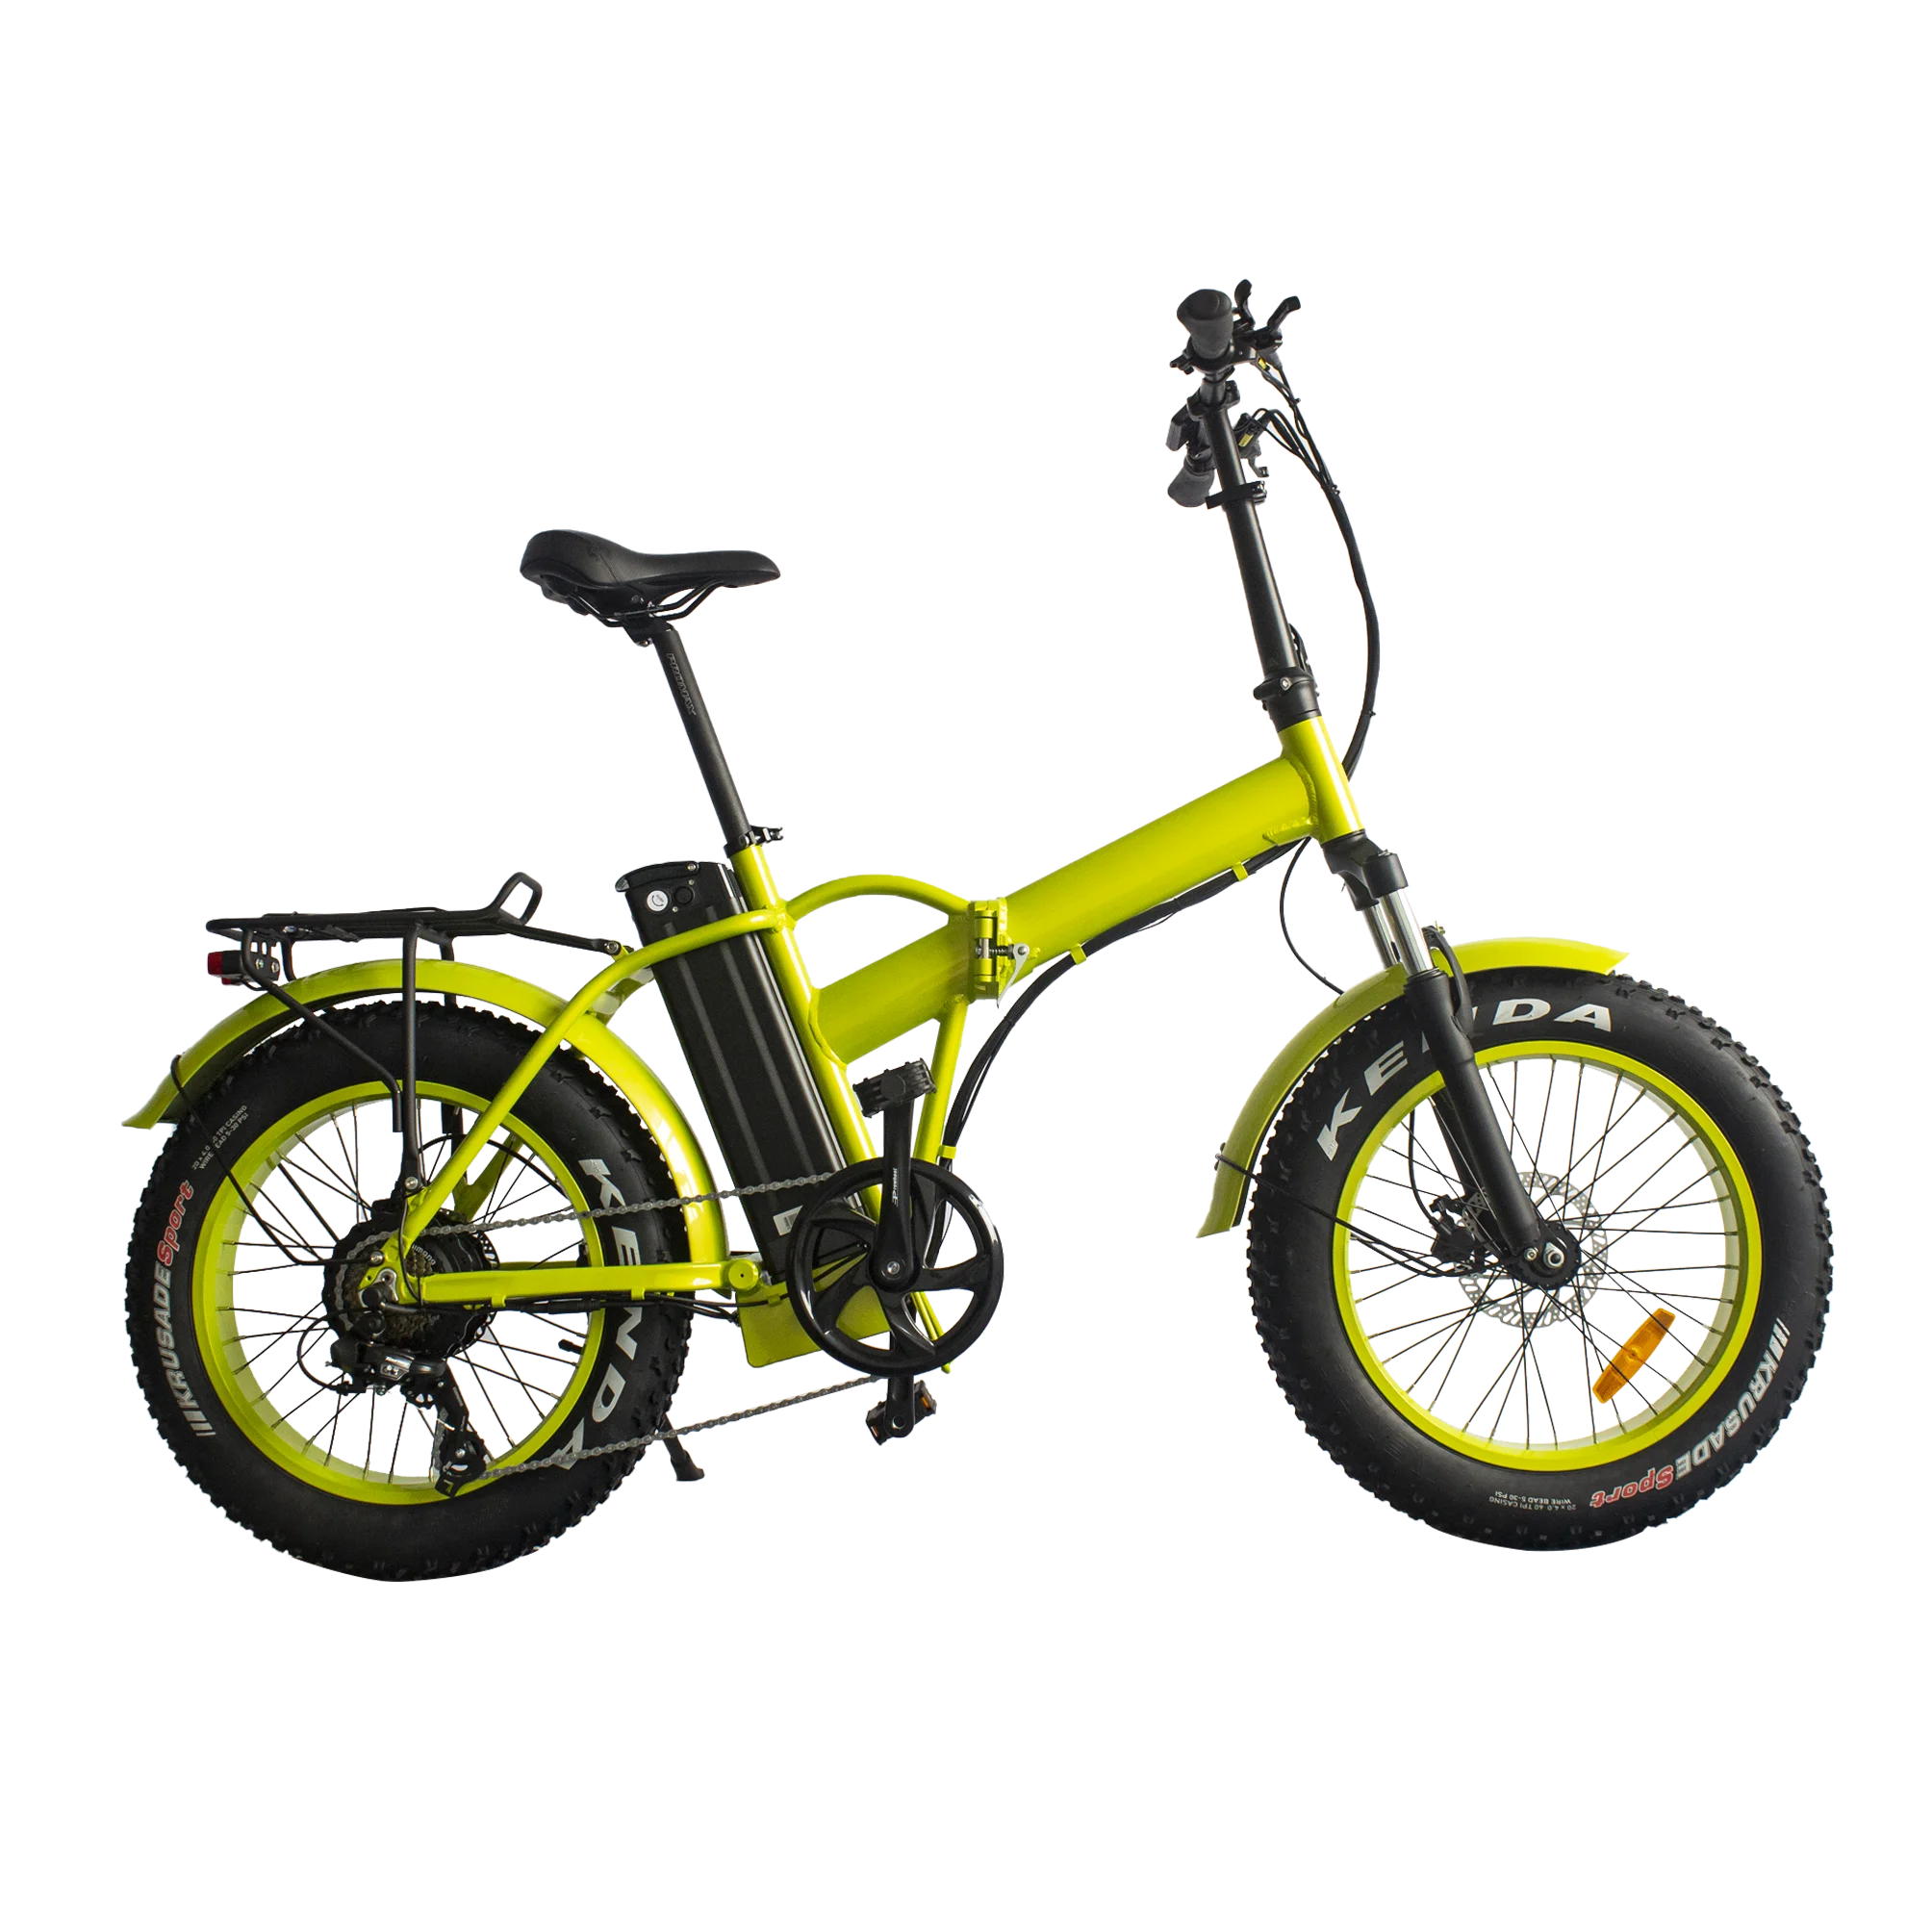 Made In China Low Price Sports Bike Electric Bicycle Adult Two Wheel Electric Bici Cruiser 60v 80km h high speed adult 6000w electric scooter 2 wheel folding electric scooter price china